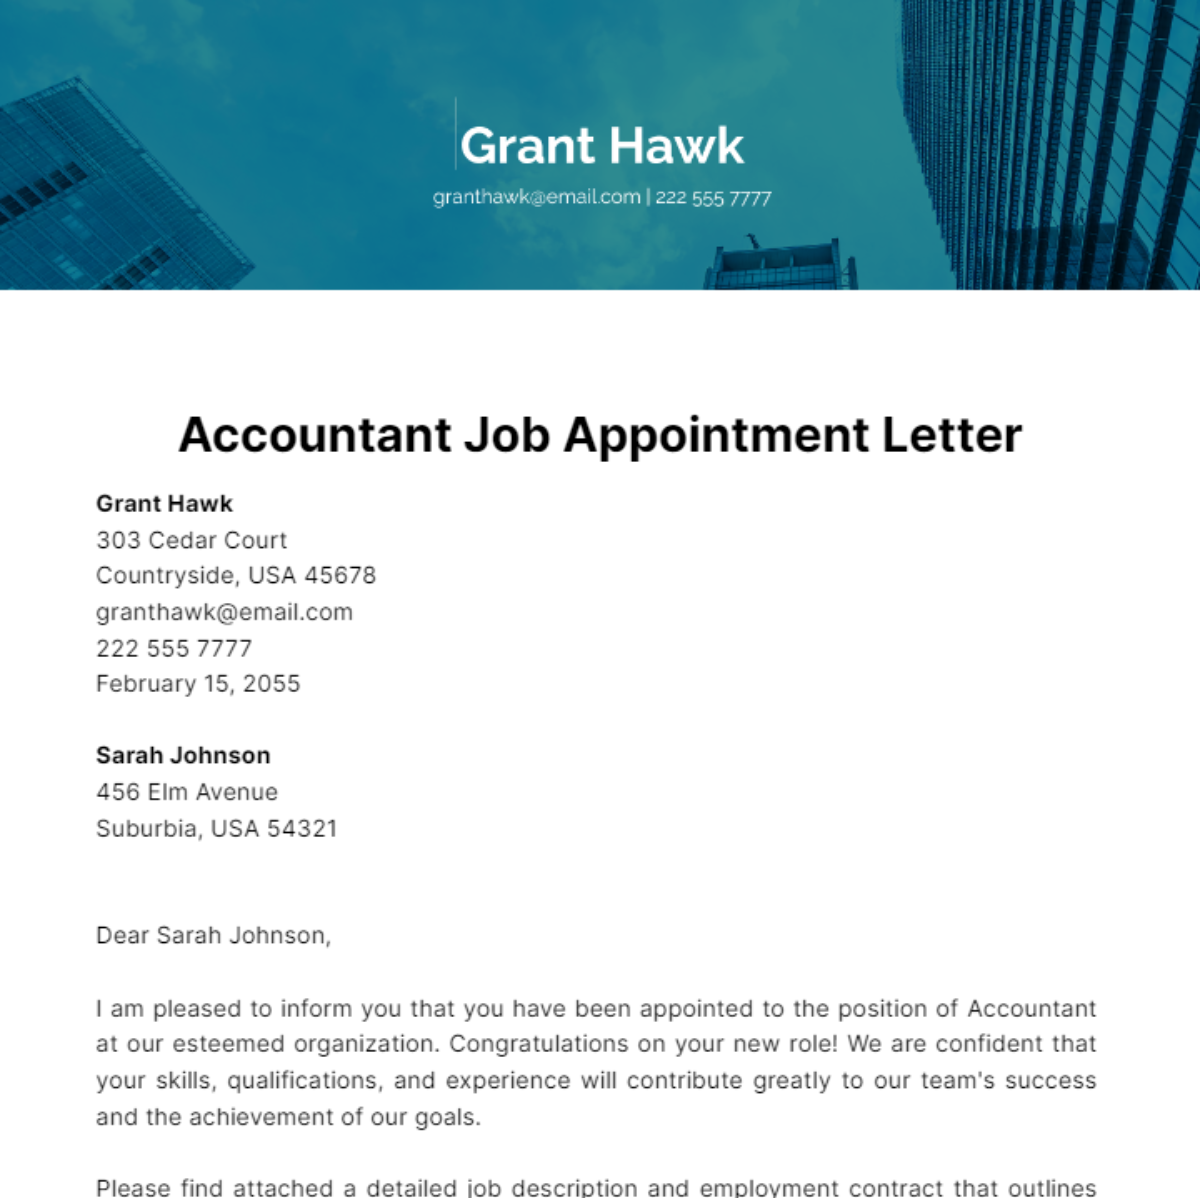 Accountant Job Appointment Letter Template